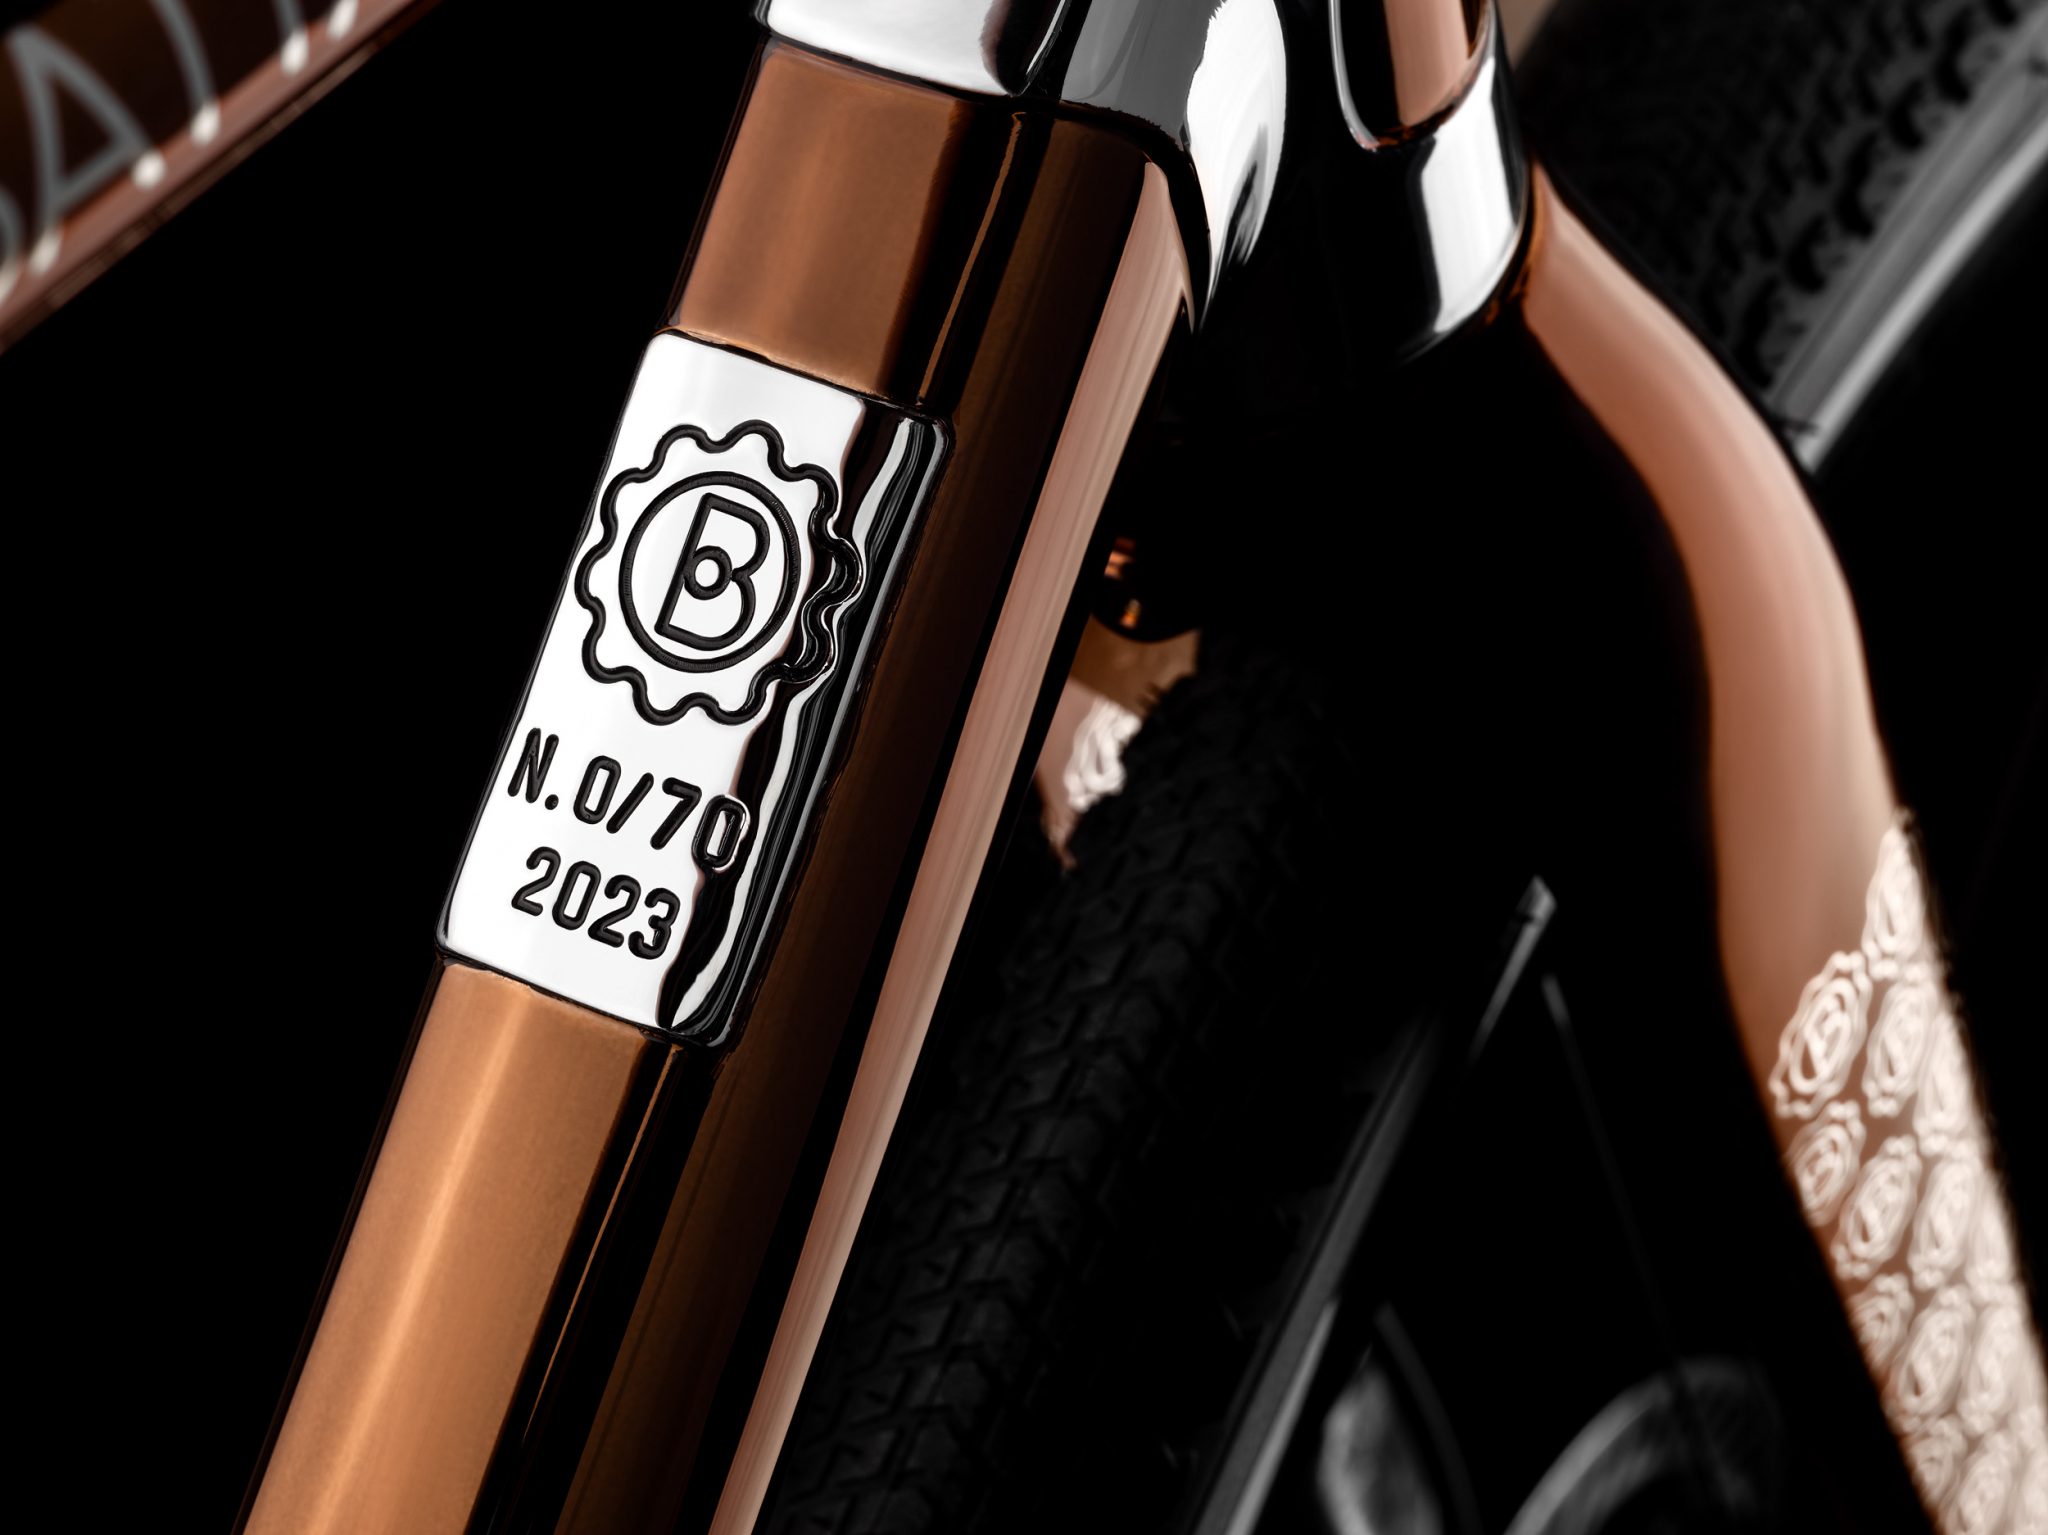 The Battaglin Portofino G is limited to 70 frames/bicycles per year